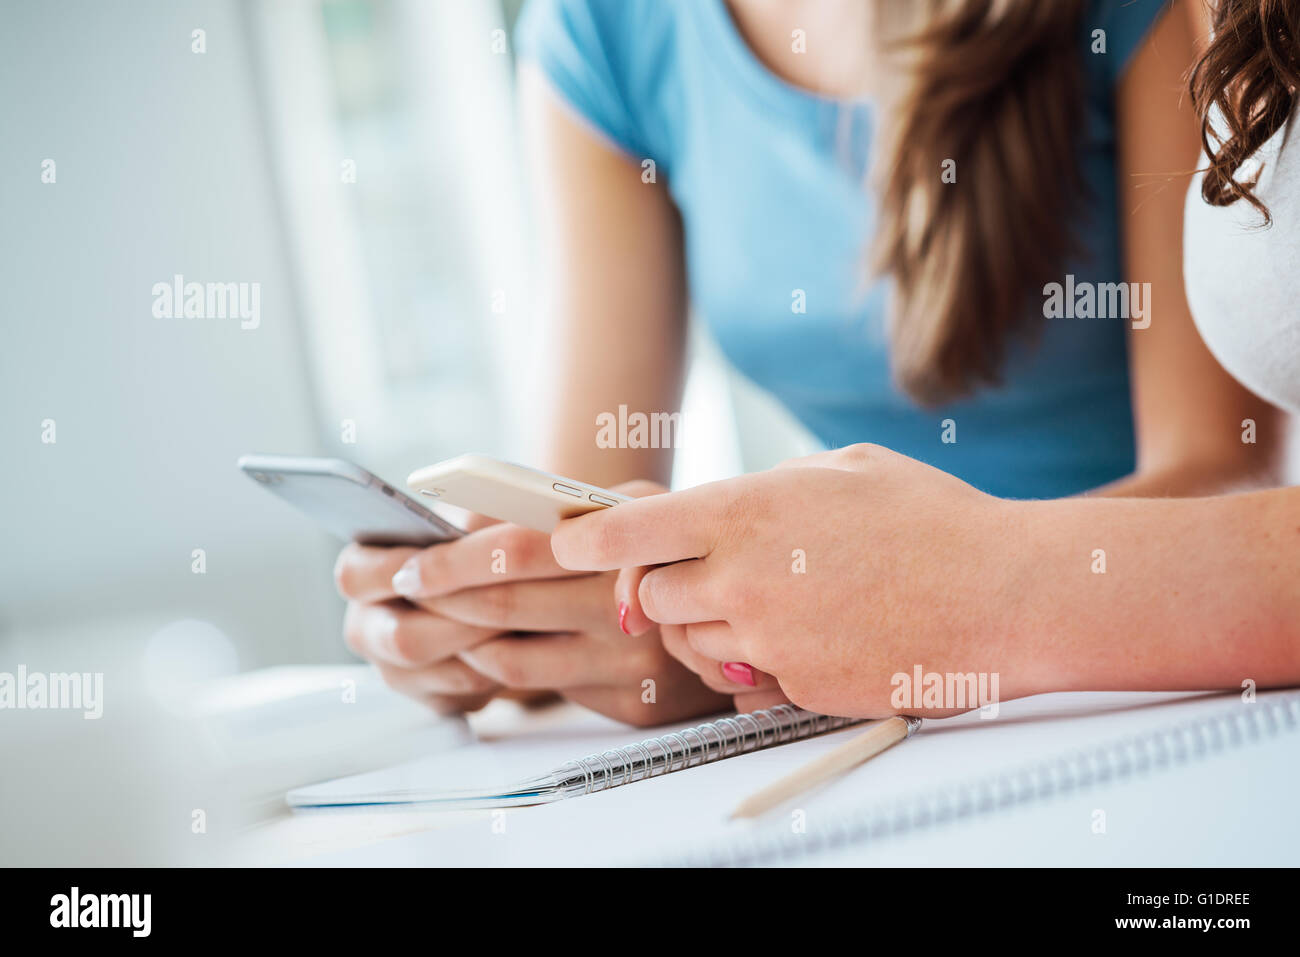 Teenager female students sitting at desk, studying and using touch screen smart phones, youth culture and telecommunications con Stock Photo